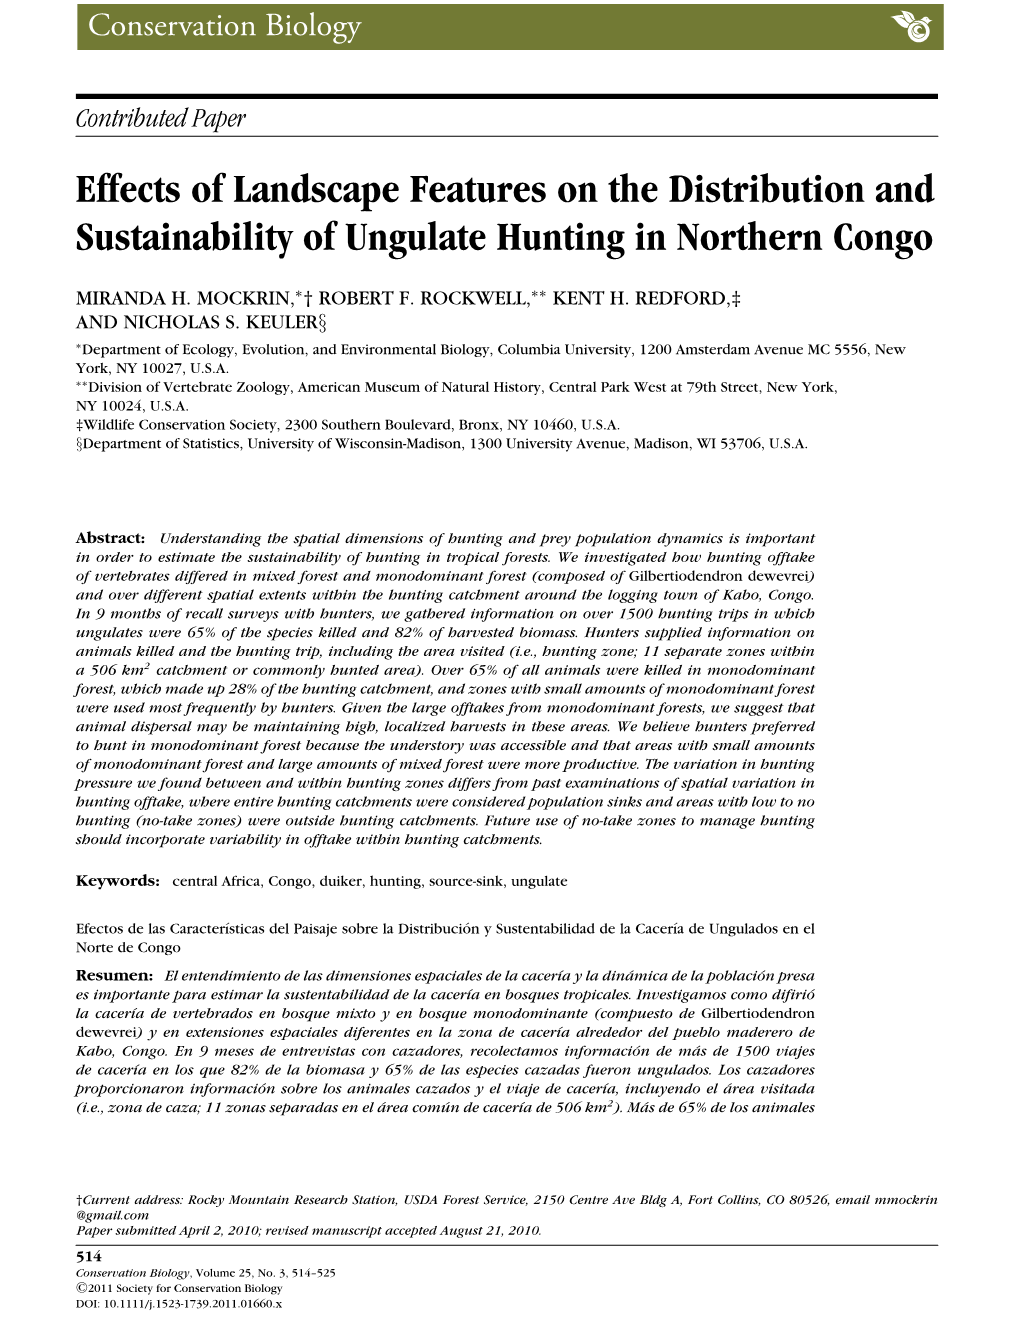 Effects of Landscape Features on the Distribution and Sustainability of Ungulate Hunting in Northern Congo